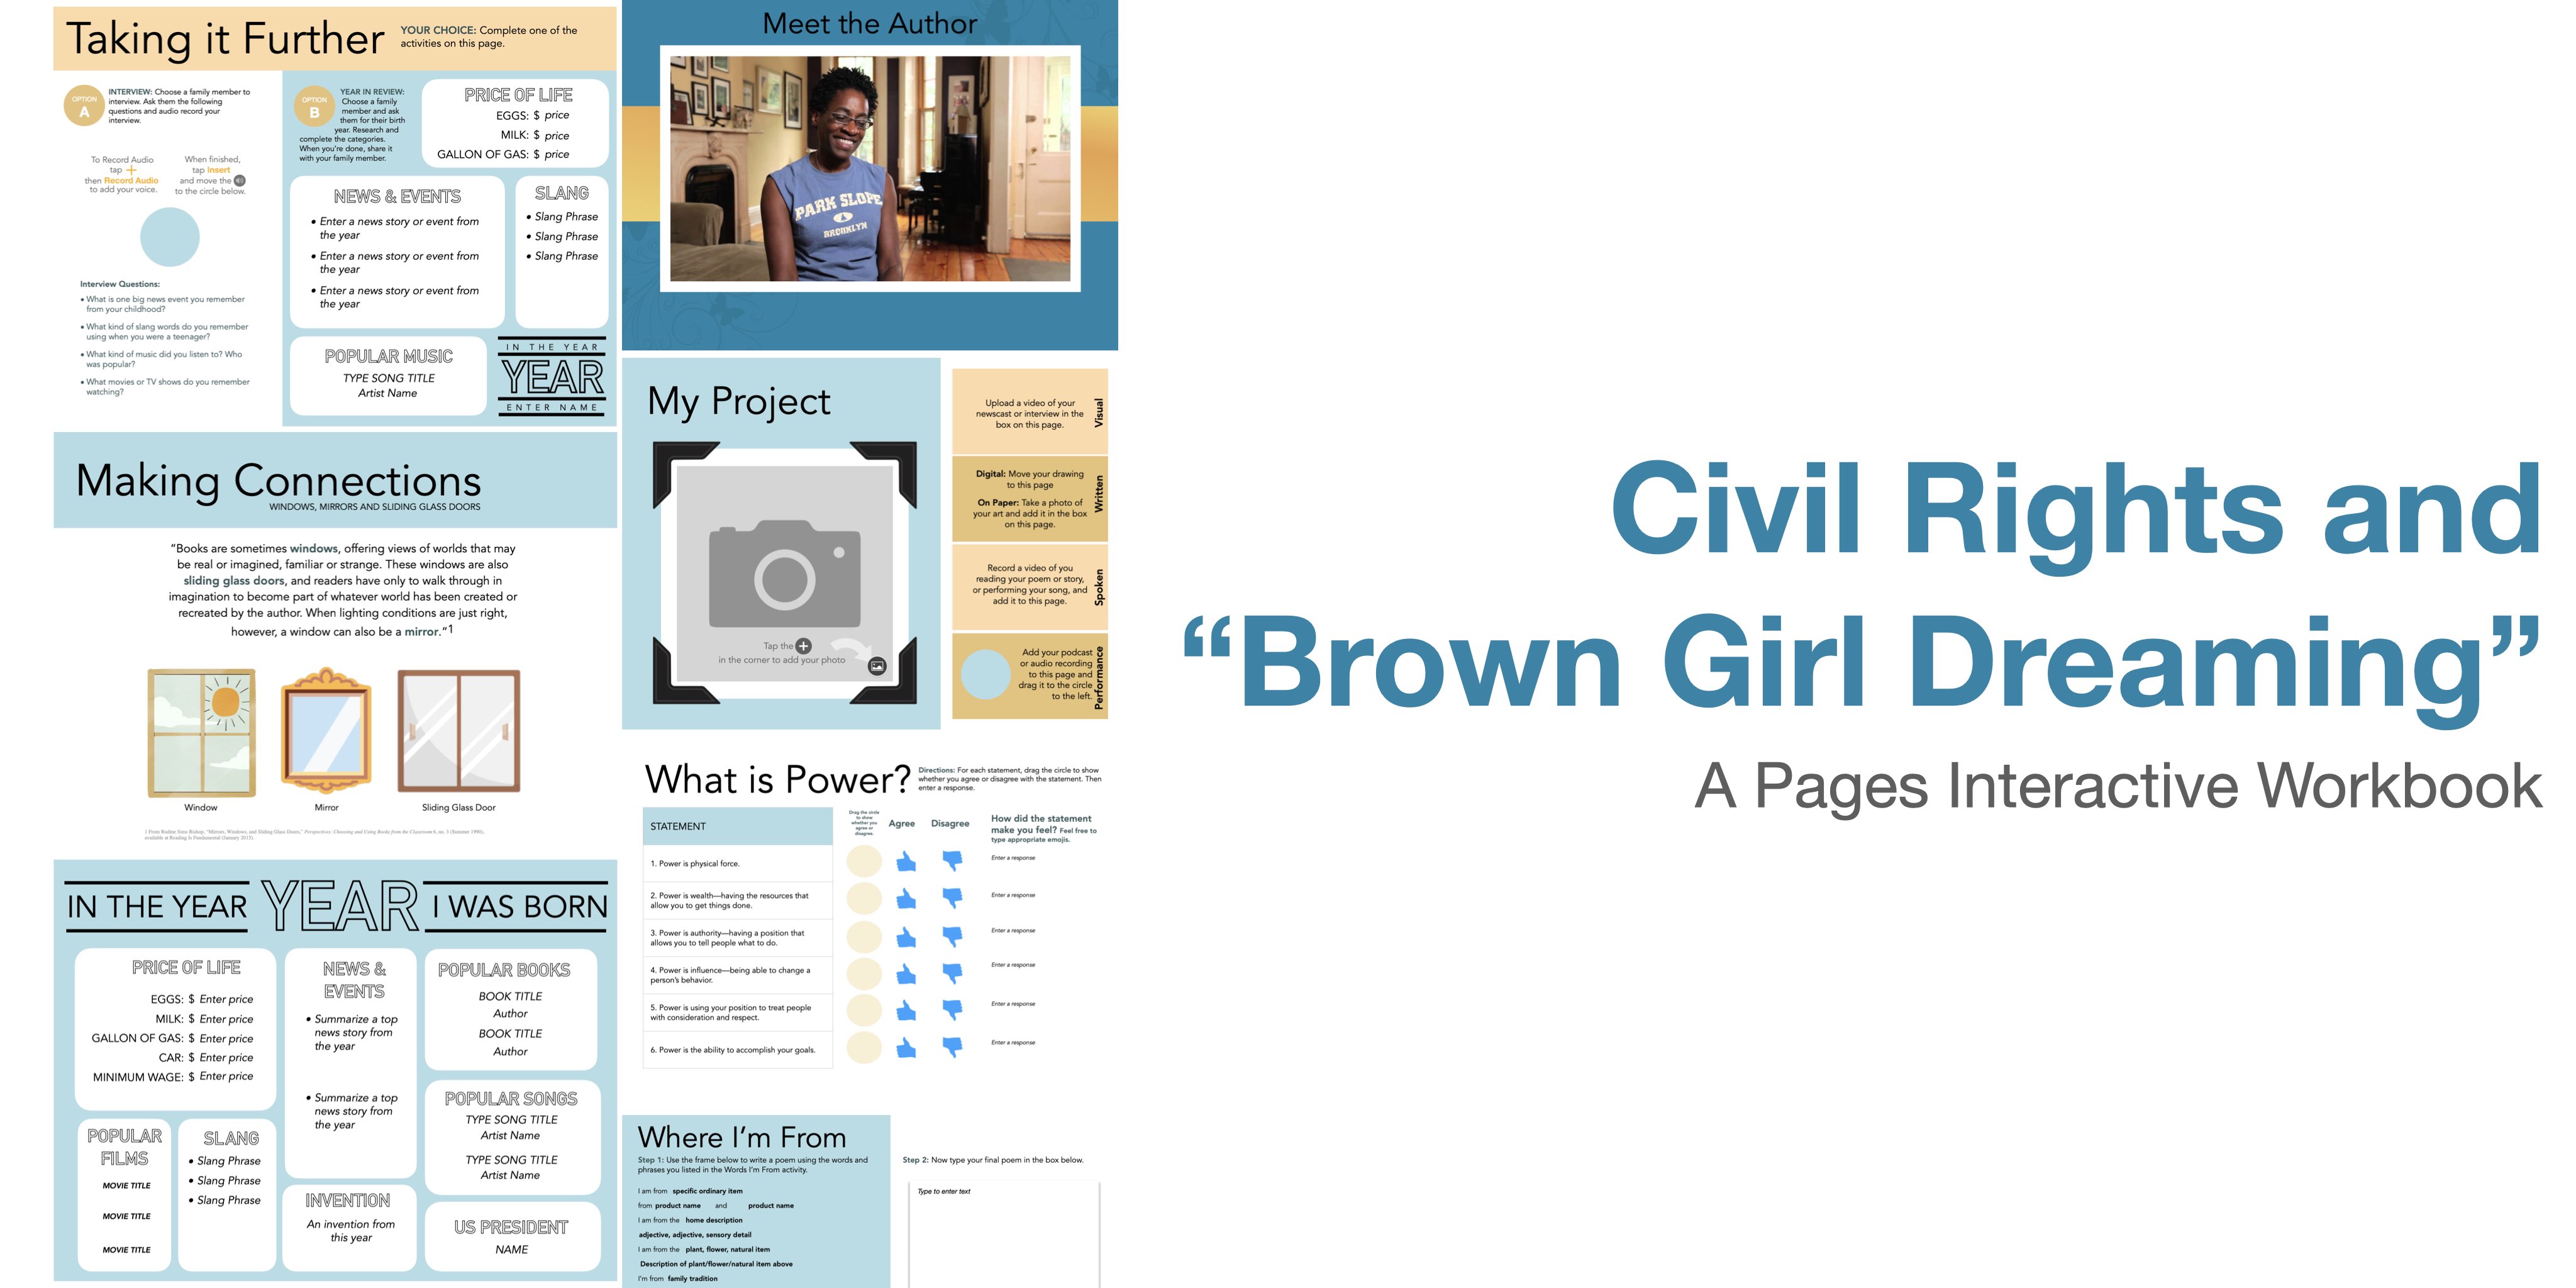 Image contains preview thumbnails of the pages in the Civil Rights and Brown Girl Dreaming workbook.